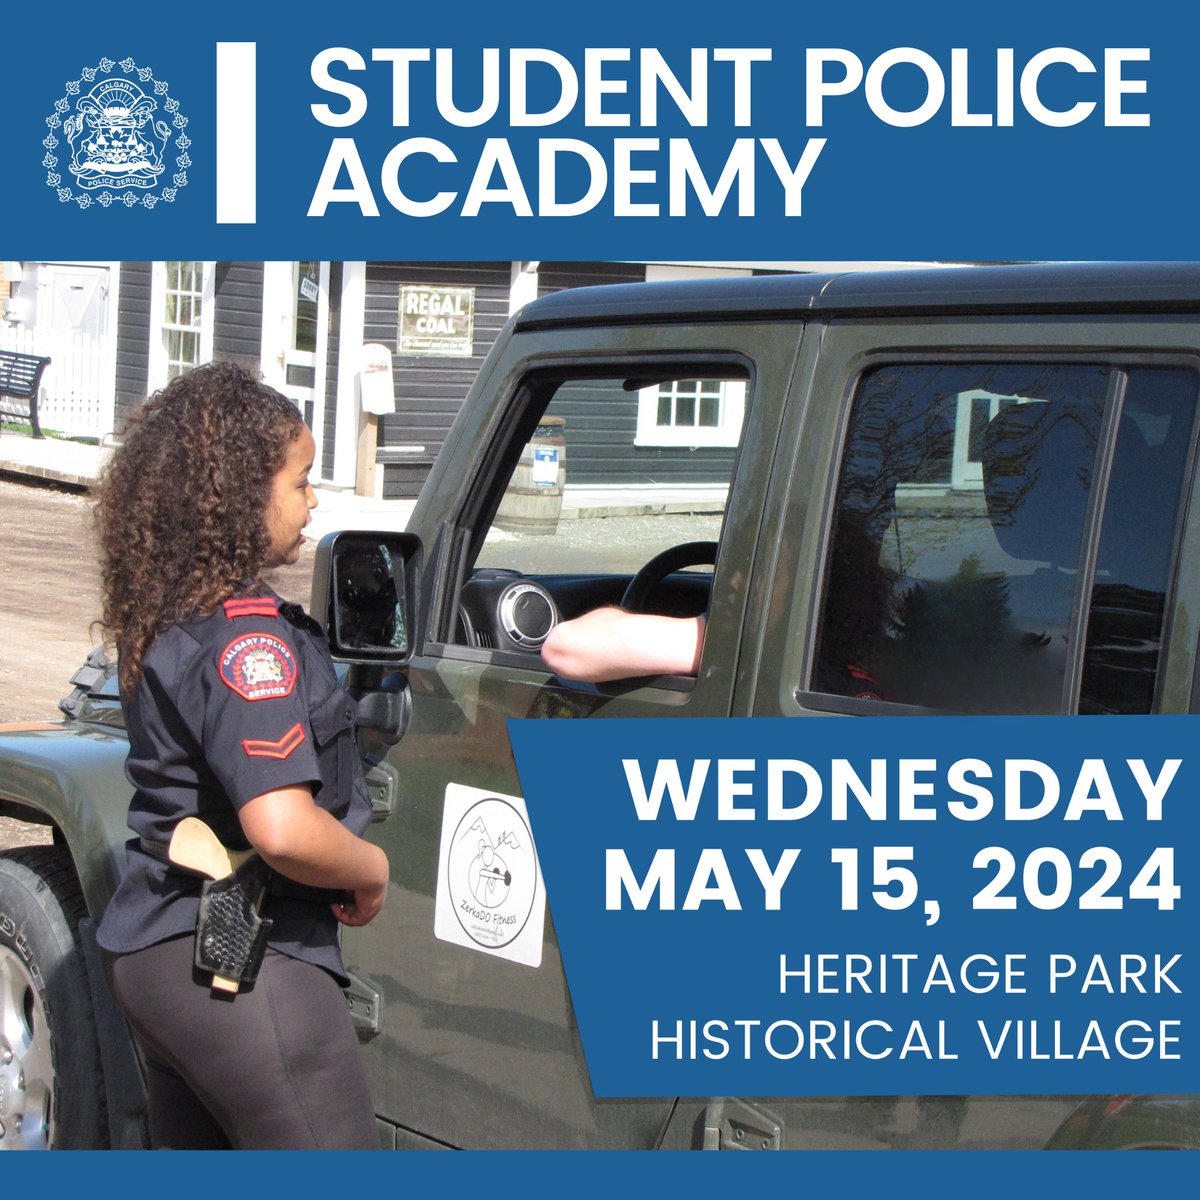 👮‍♂️ Are you or do you know a Grade 12 student considering a career in policing? We’re looking for participants for this year’s Student Police Academy! This one-day event gives students the chance to take part in scenario-based activities that provide a glimpse into the life of a